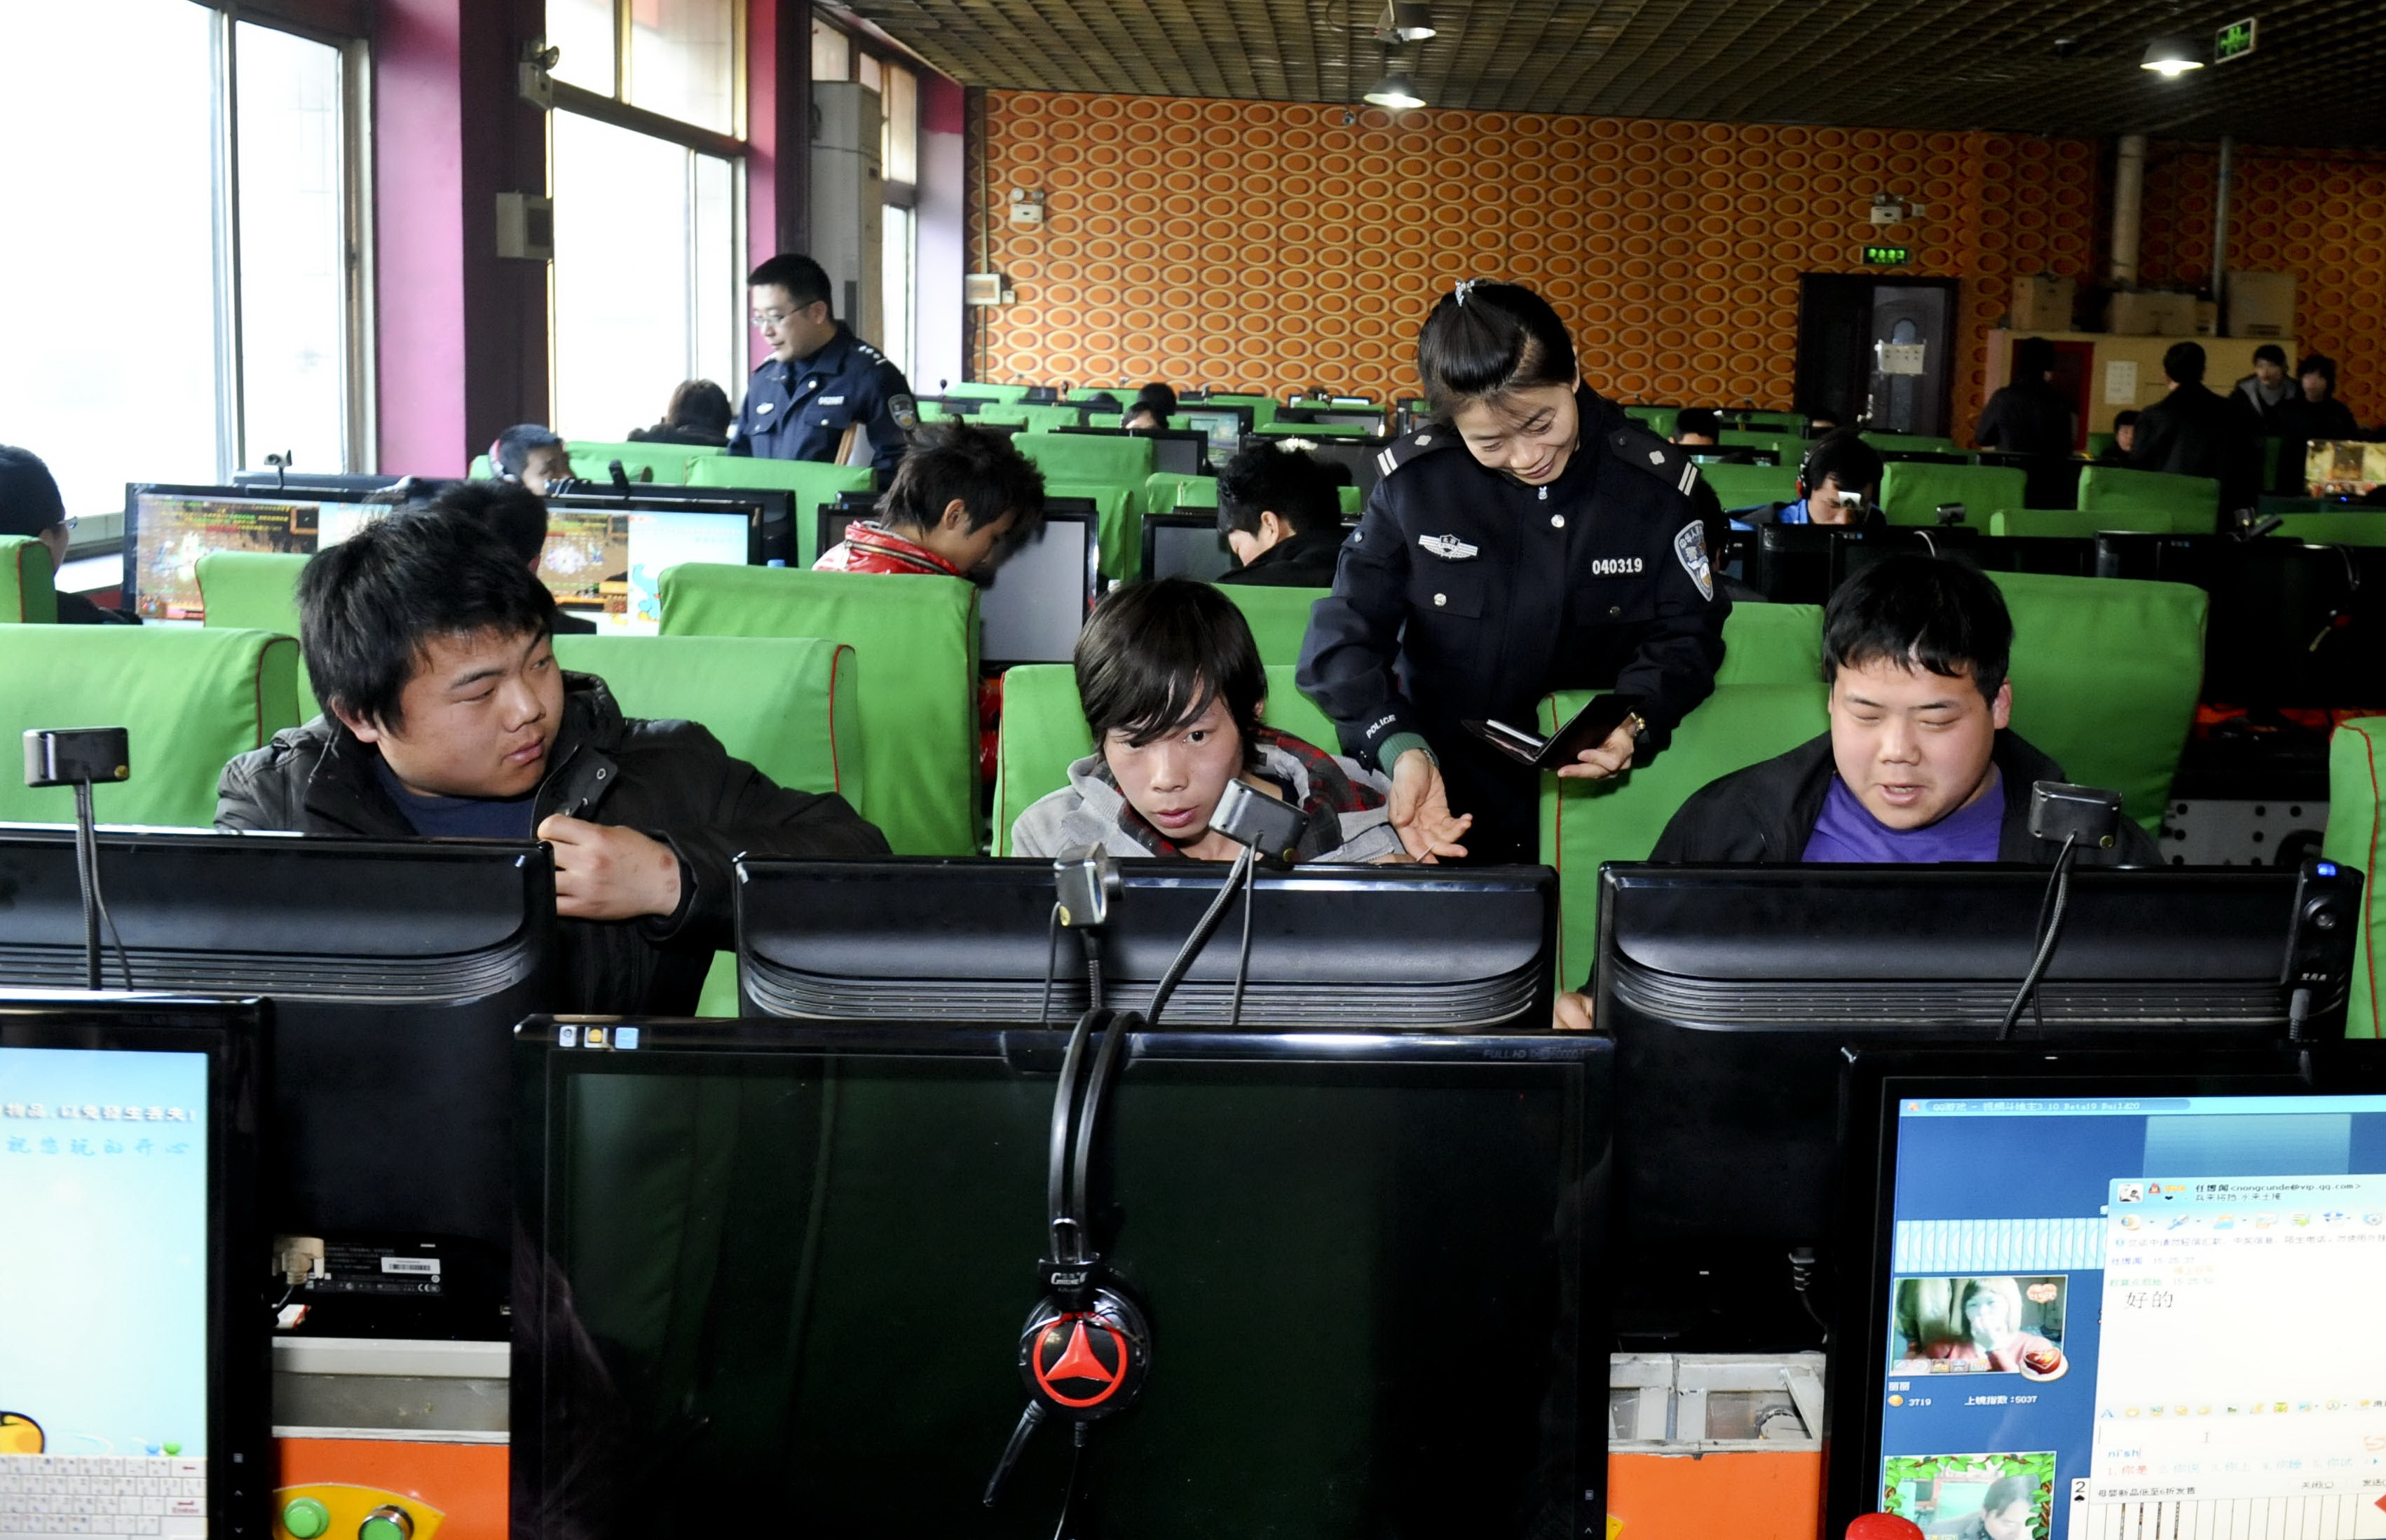 --FILE--Chinese policemen of the China Network Management of the Public Security check an Internet cafe in Beijing, China, 22 February 2012.

China looks poised to launch another crackdown on its social networks after two newspapers carried editorials defending restrictions on the Internet.The articles coincided with complaints from internet users that its so-called Great Firewall had been upgraded and was now able to automatically detect and block virtual private networks, or VPNs. In Fridays (21 December 2012) Global Times quoted officials saying foreign-run VPNs were illegal defended restrictions on the Internet in an editorial headlined. No Use China. No Use France.